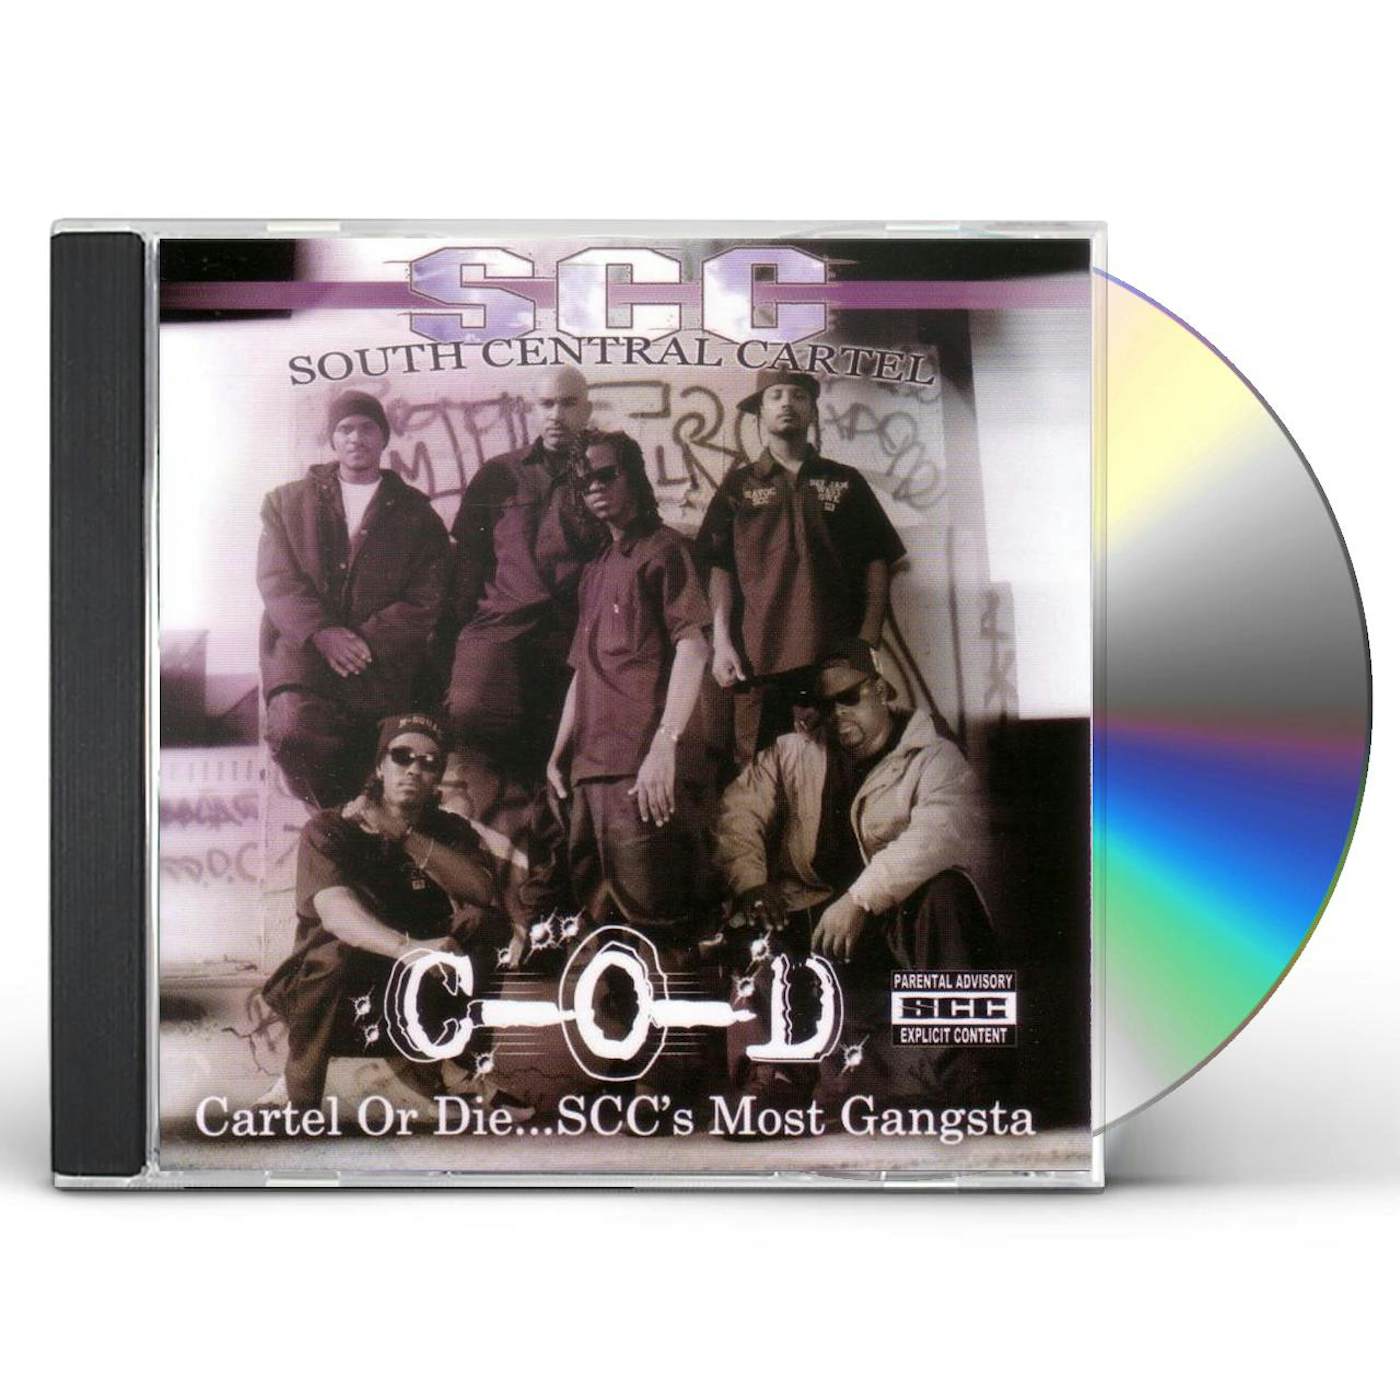 South Central Cartel CARTEL OR DIE SCC'S MOST GANSTA: GREATEST HITS CD